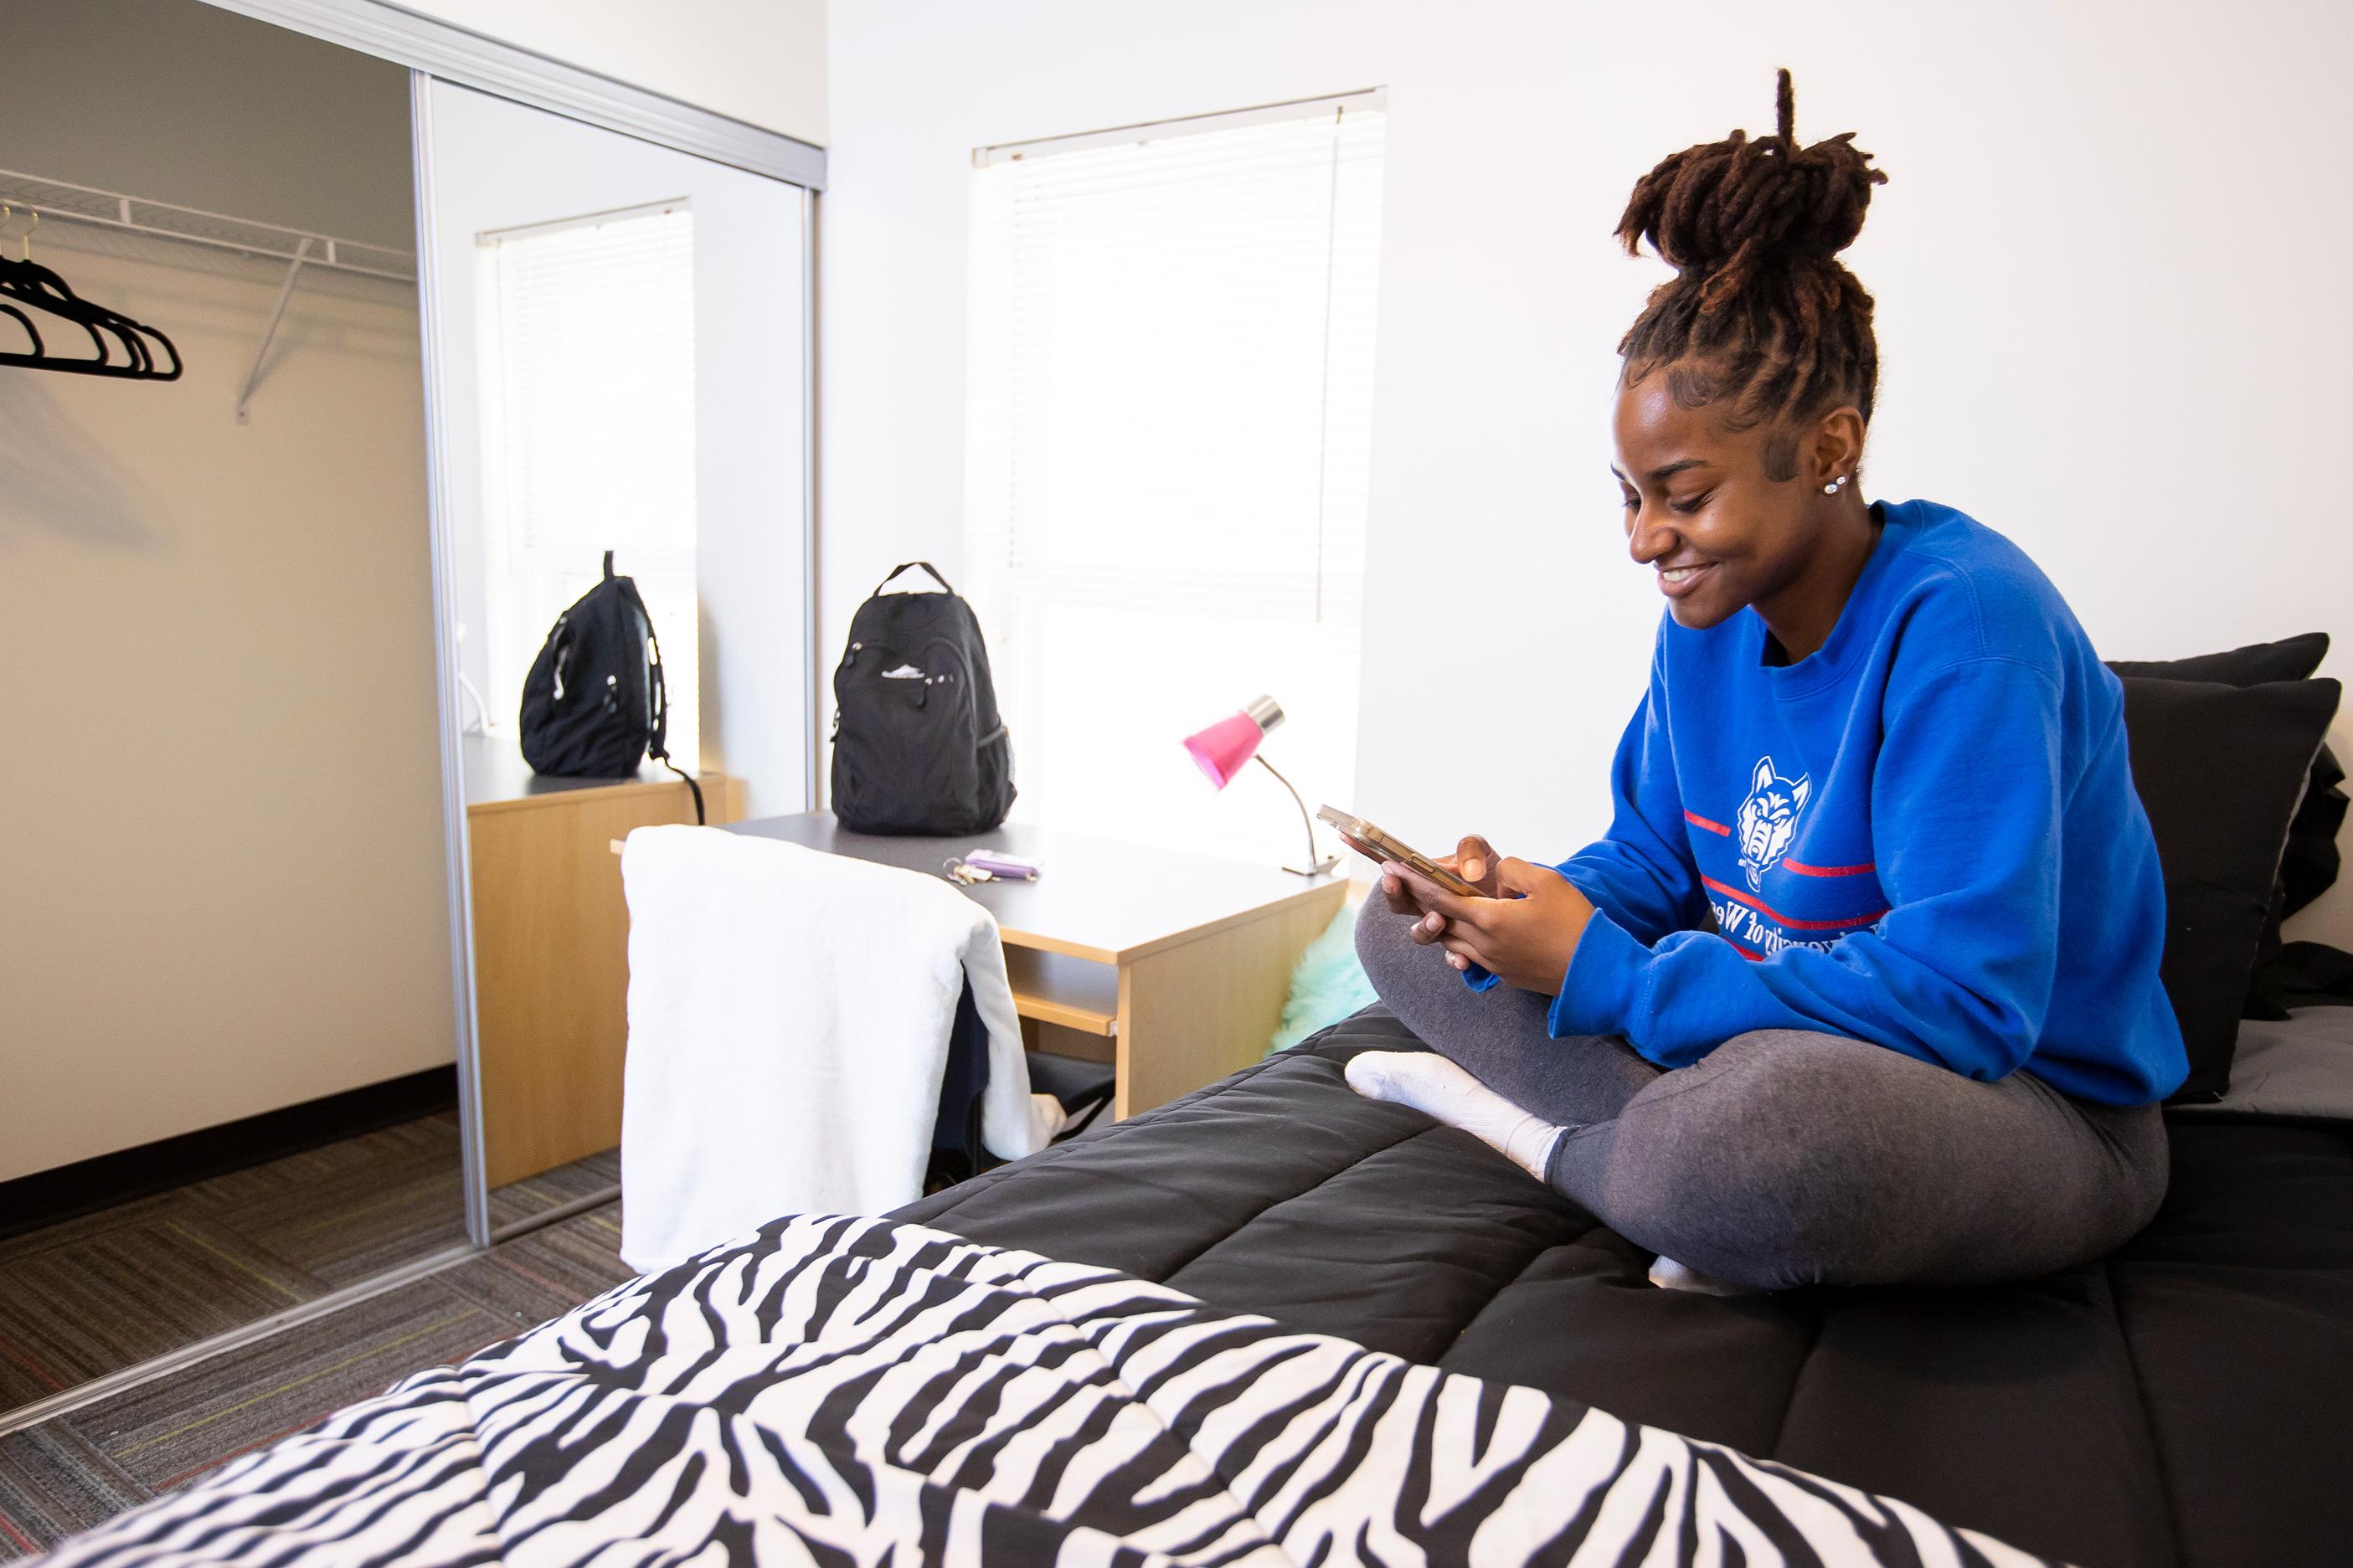 Student in private room looking at phone on bed